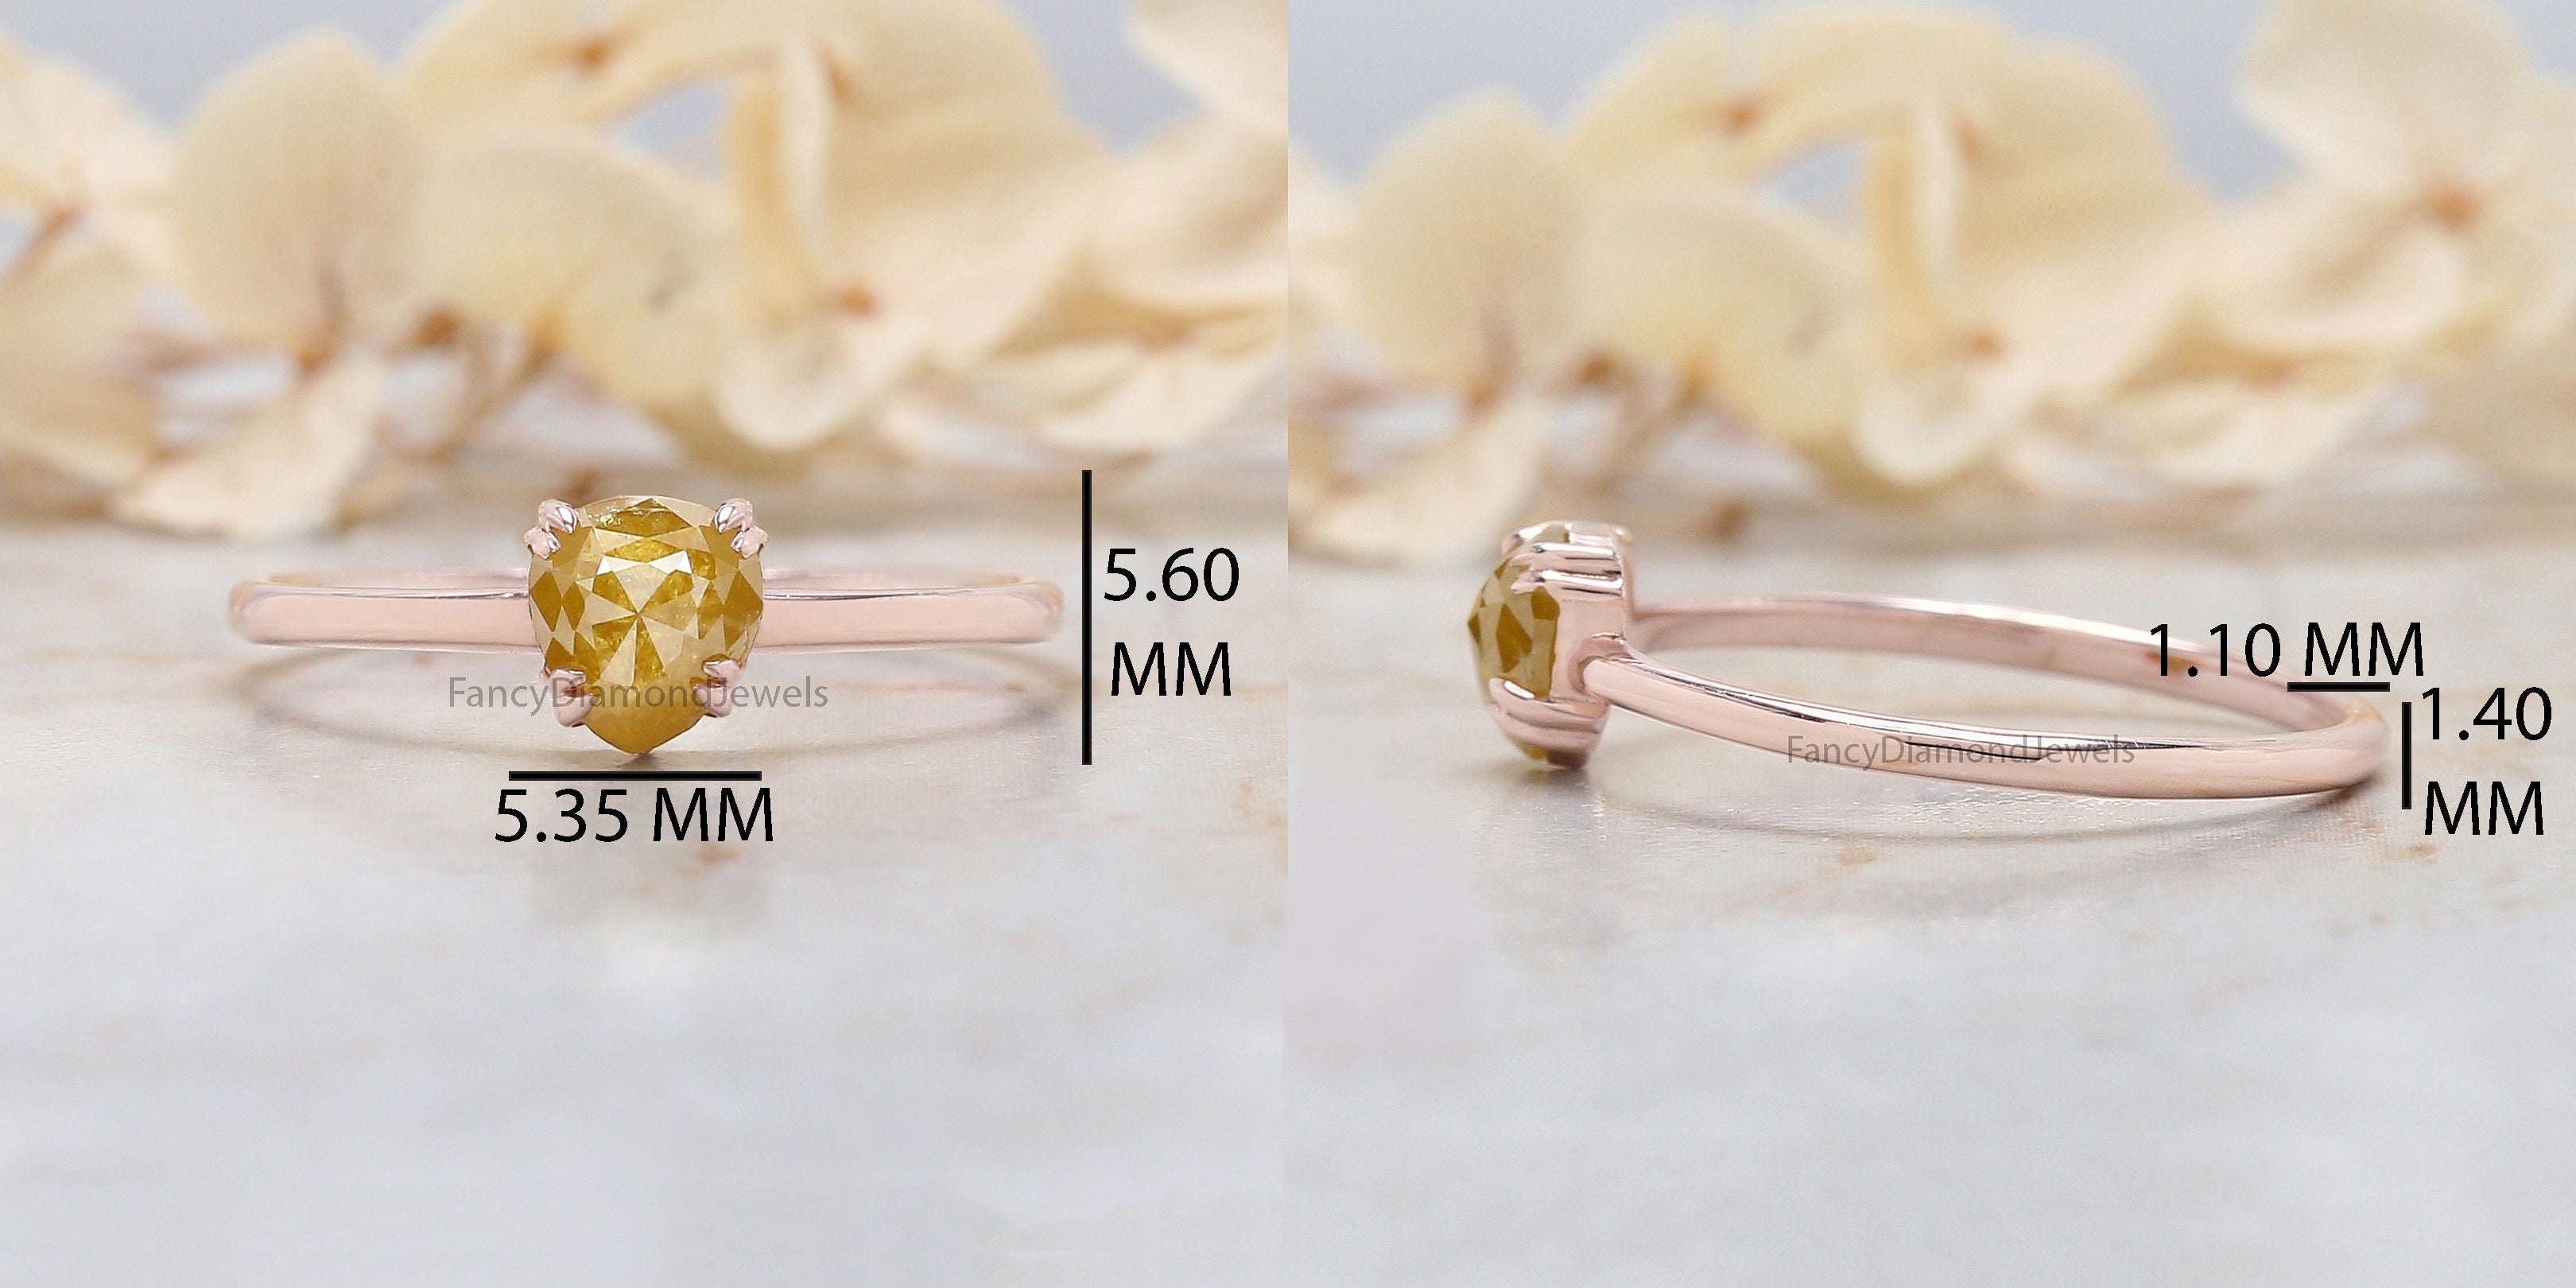 Heart Cut Yellow Color Diamond Ring 0.59 Ct 5.47 MM Heart Shape Diamond Ring 14K Solid Rose Gold Silver Engagement Ring Gift For Her QK2510